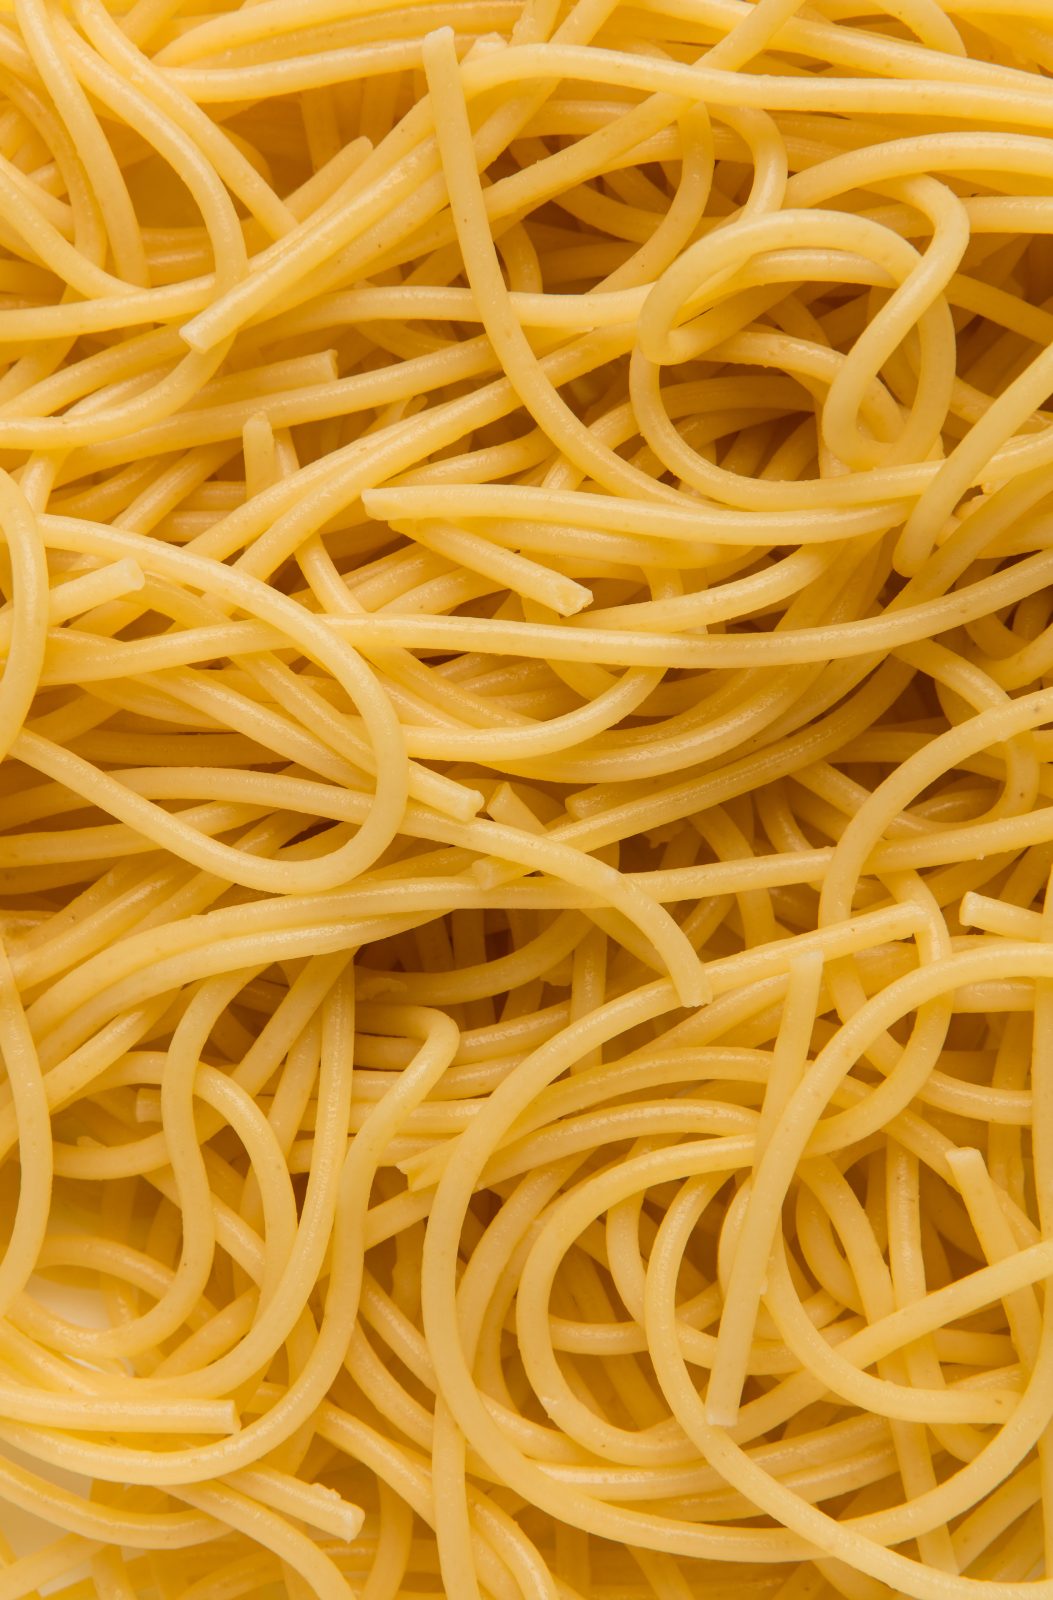 &#8216;I need to report a hate crime&#8217; &#8211; the BBC&#8217;s surprisingly controversial pasta recipe, The Manc